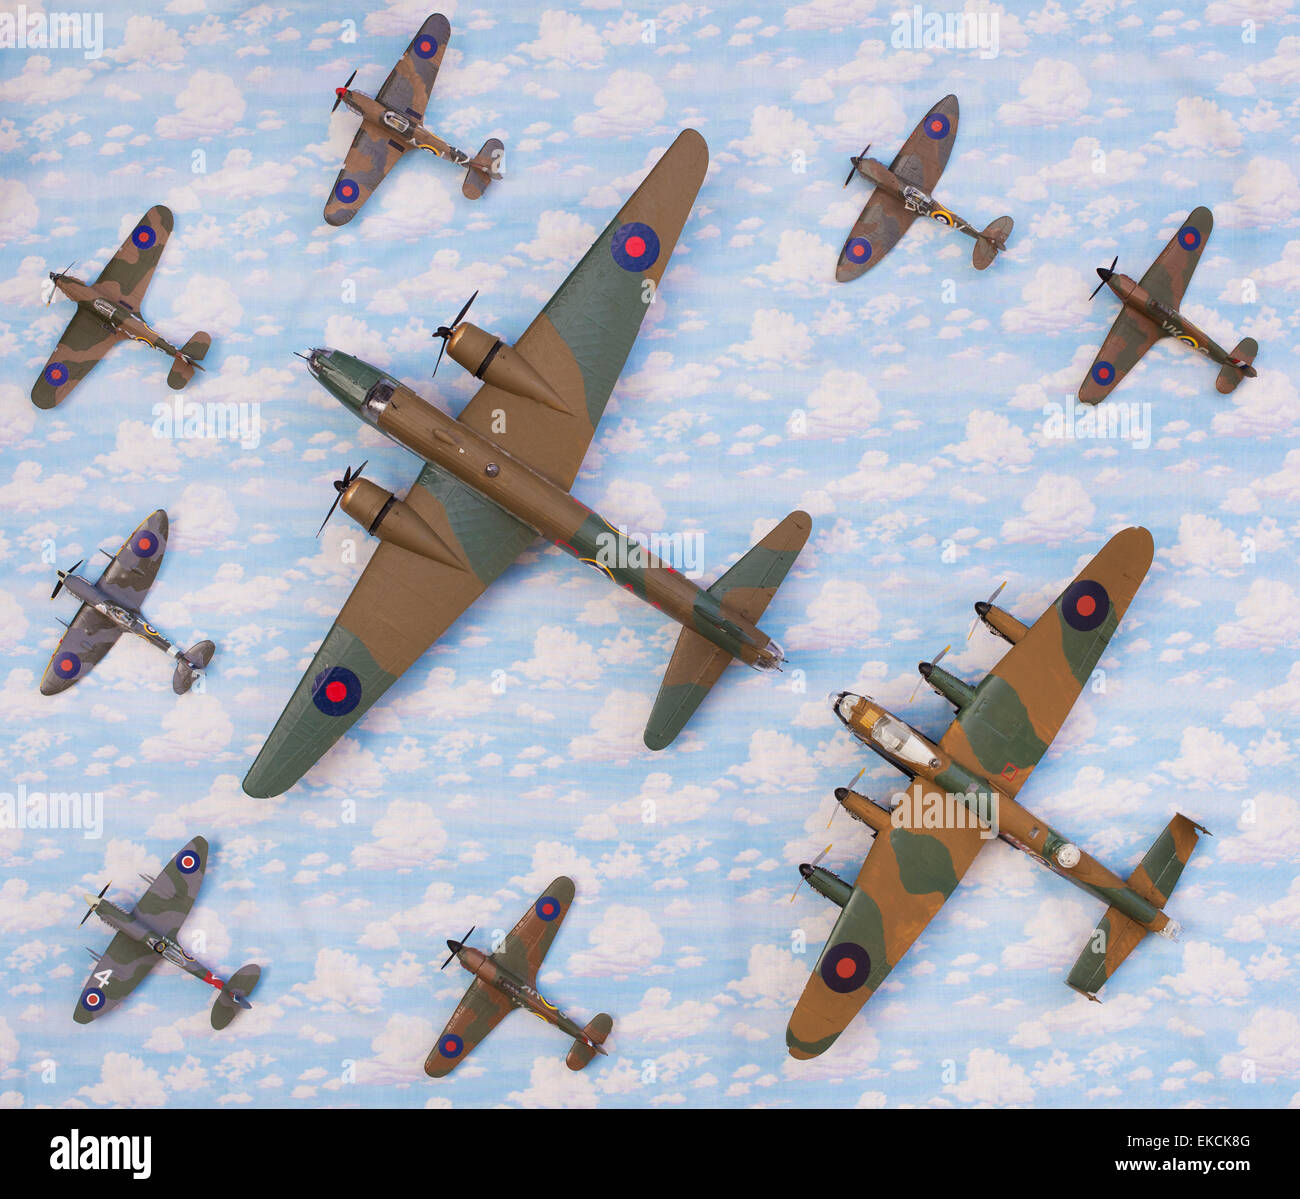 WW2 British Airfix model army planes on a sky cloud material background Stock Photo